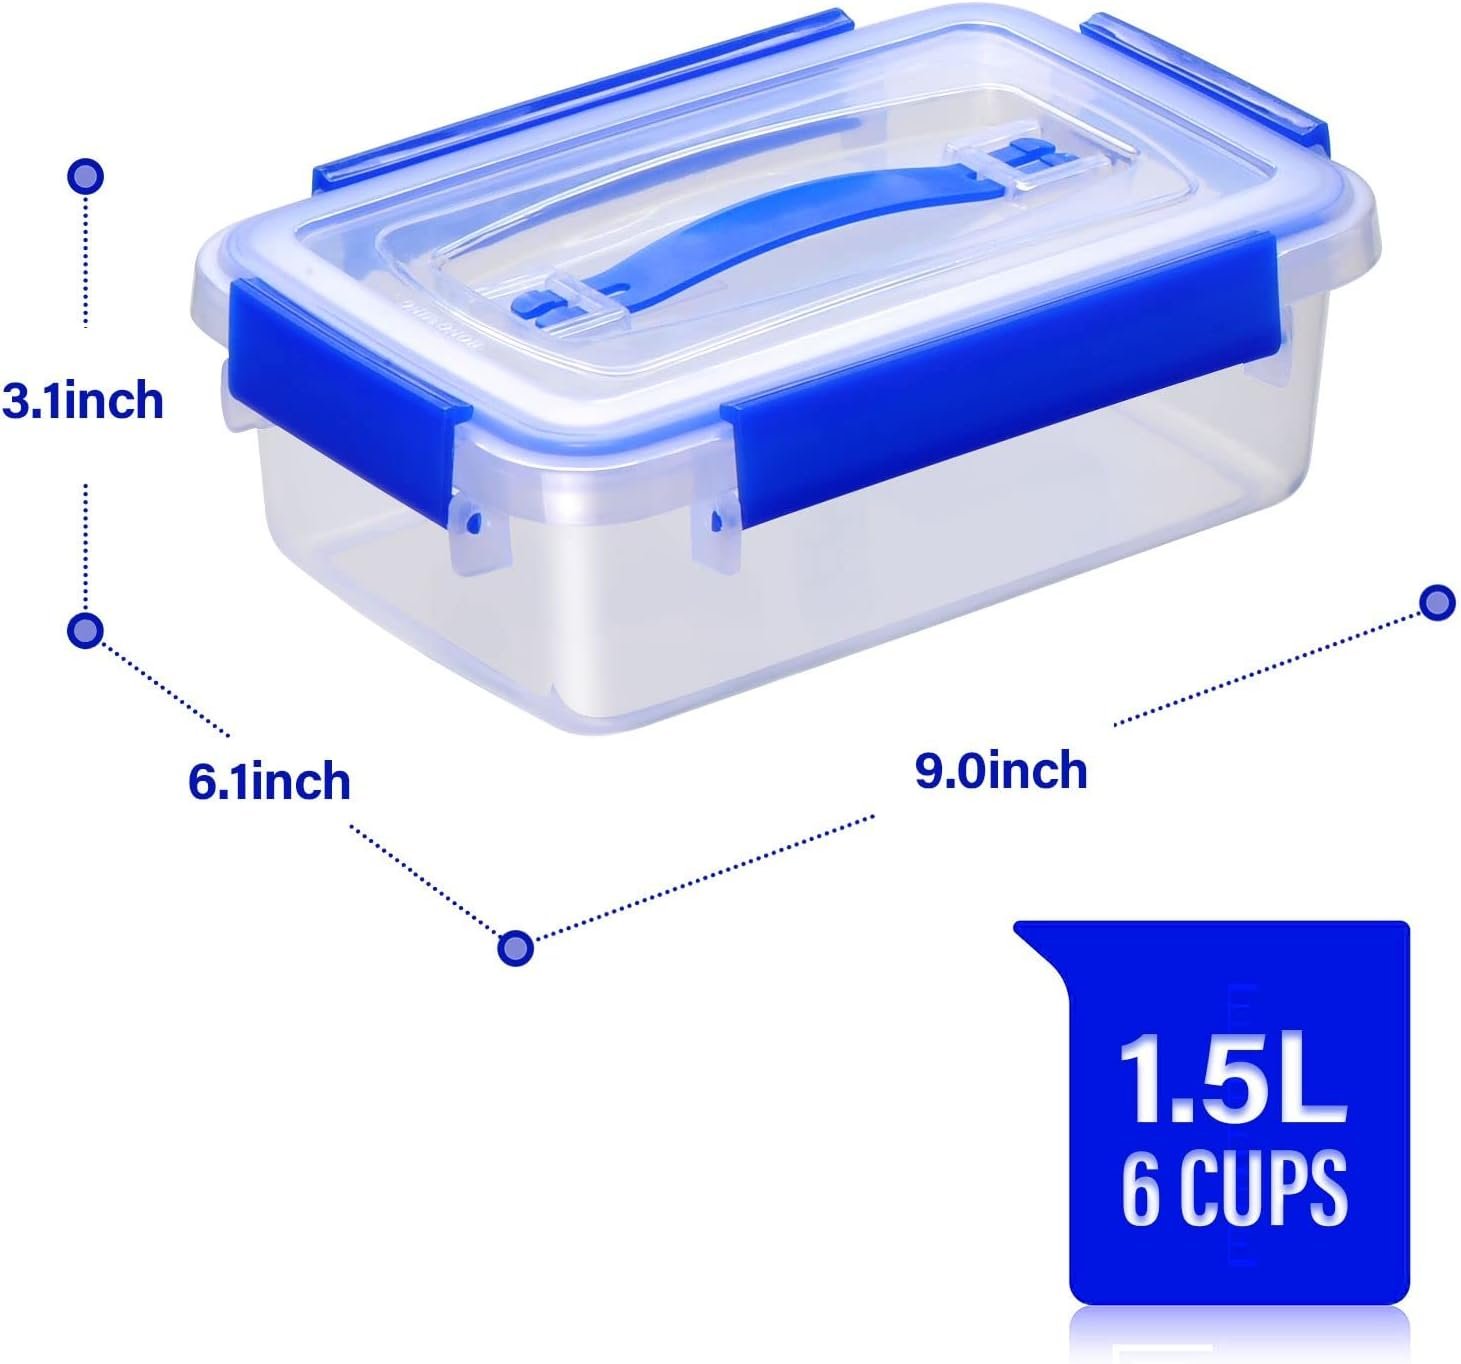 YORY Food Storage Containers Review